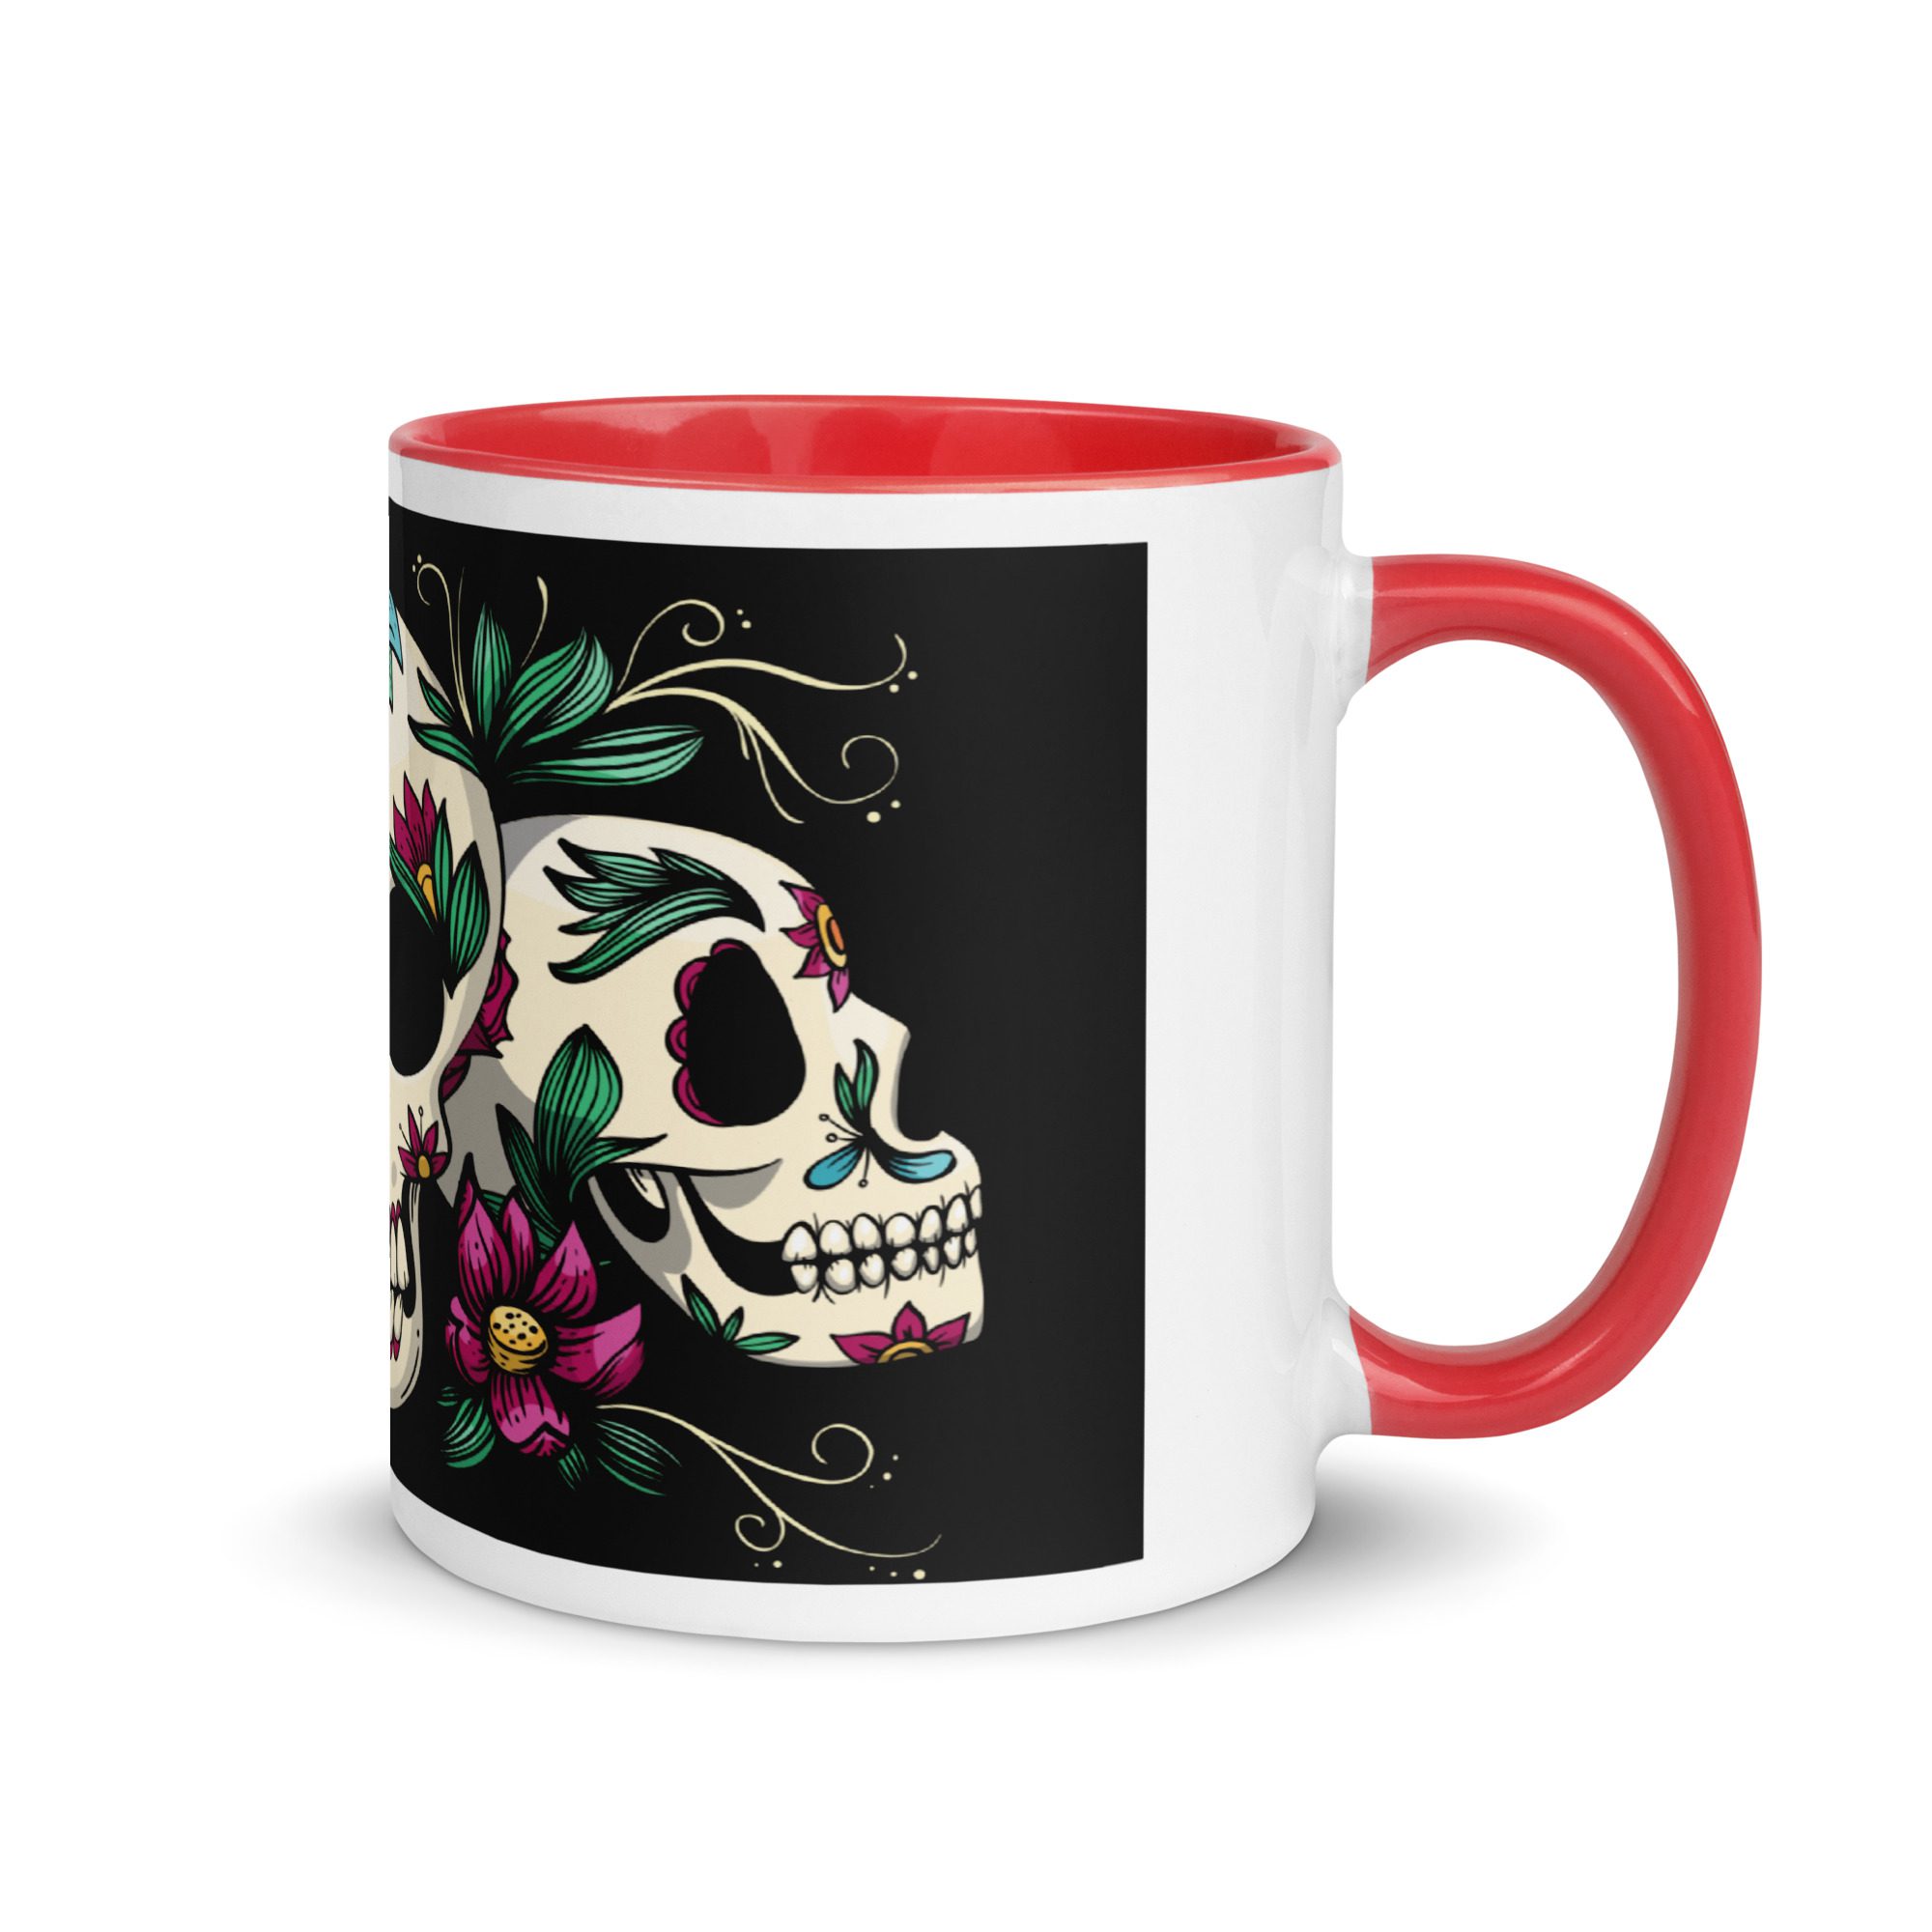 white ceramic mug with color inside red 11 oz right 65367417be7d9